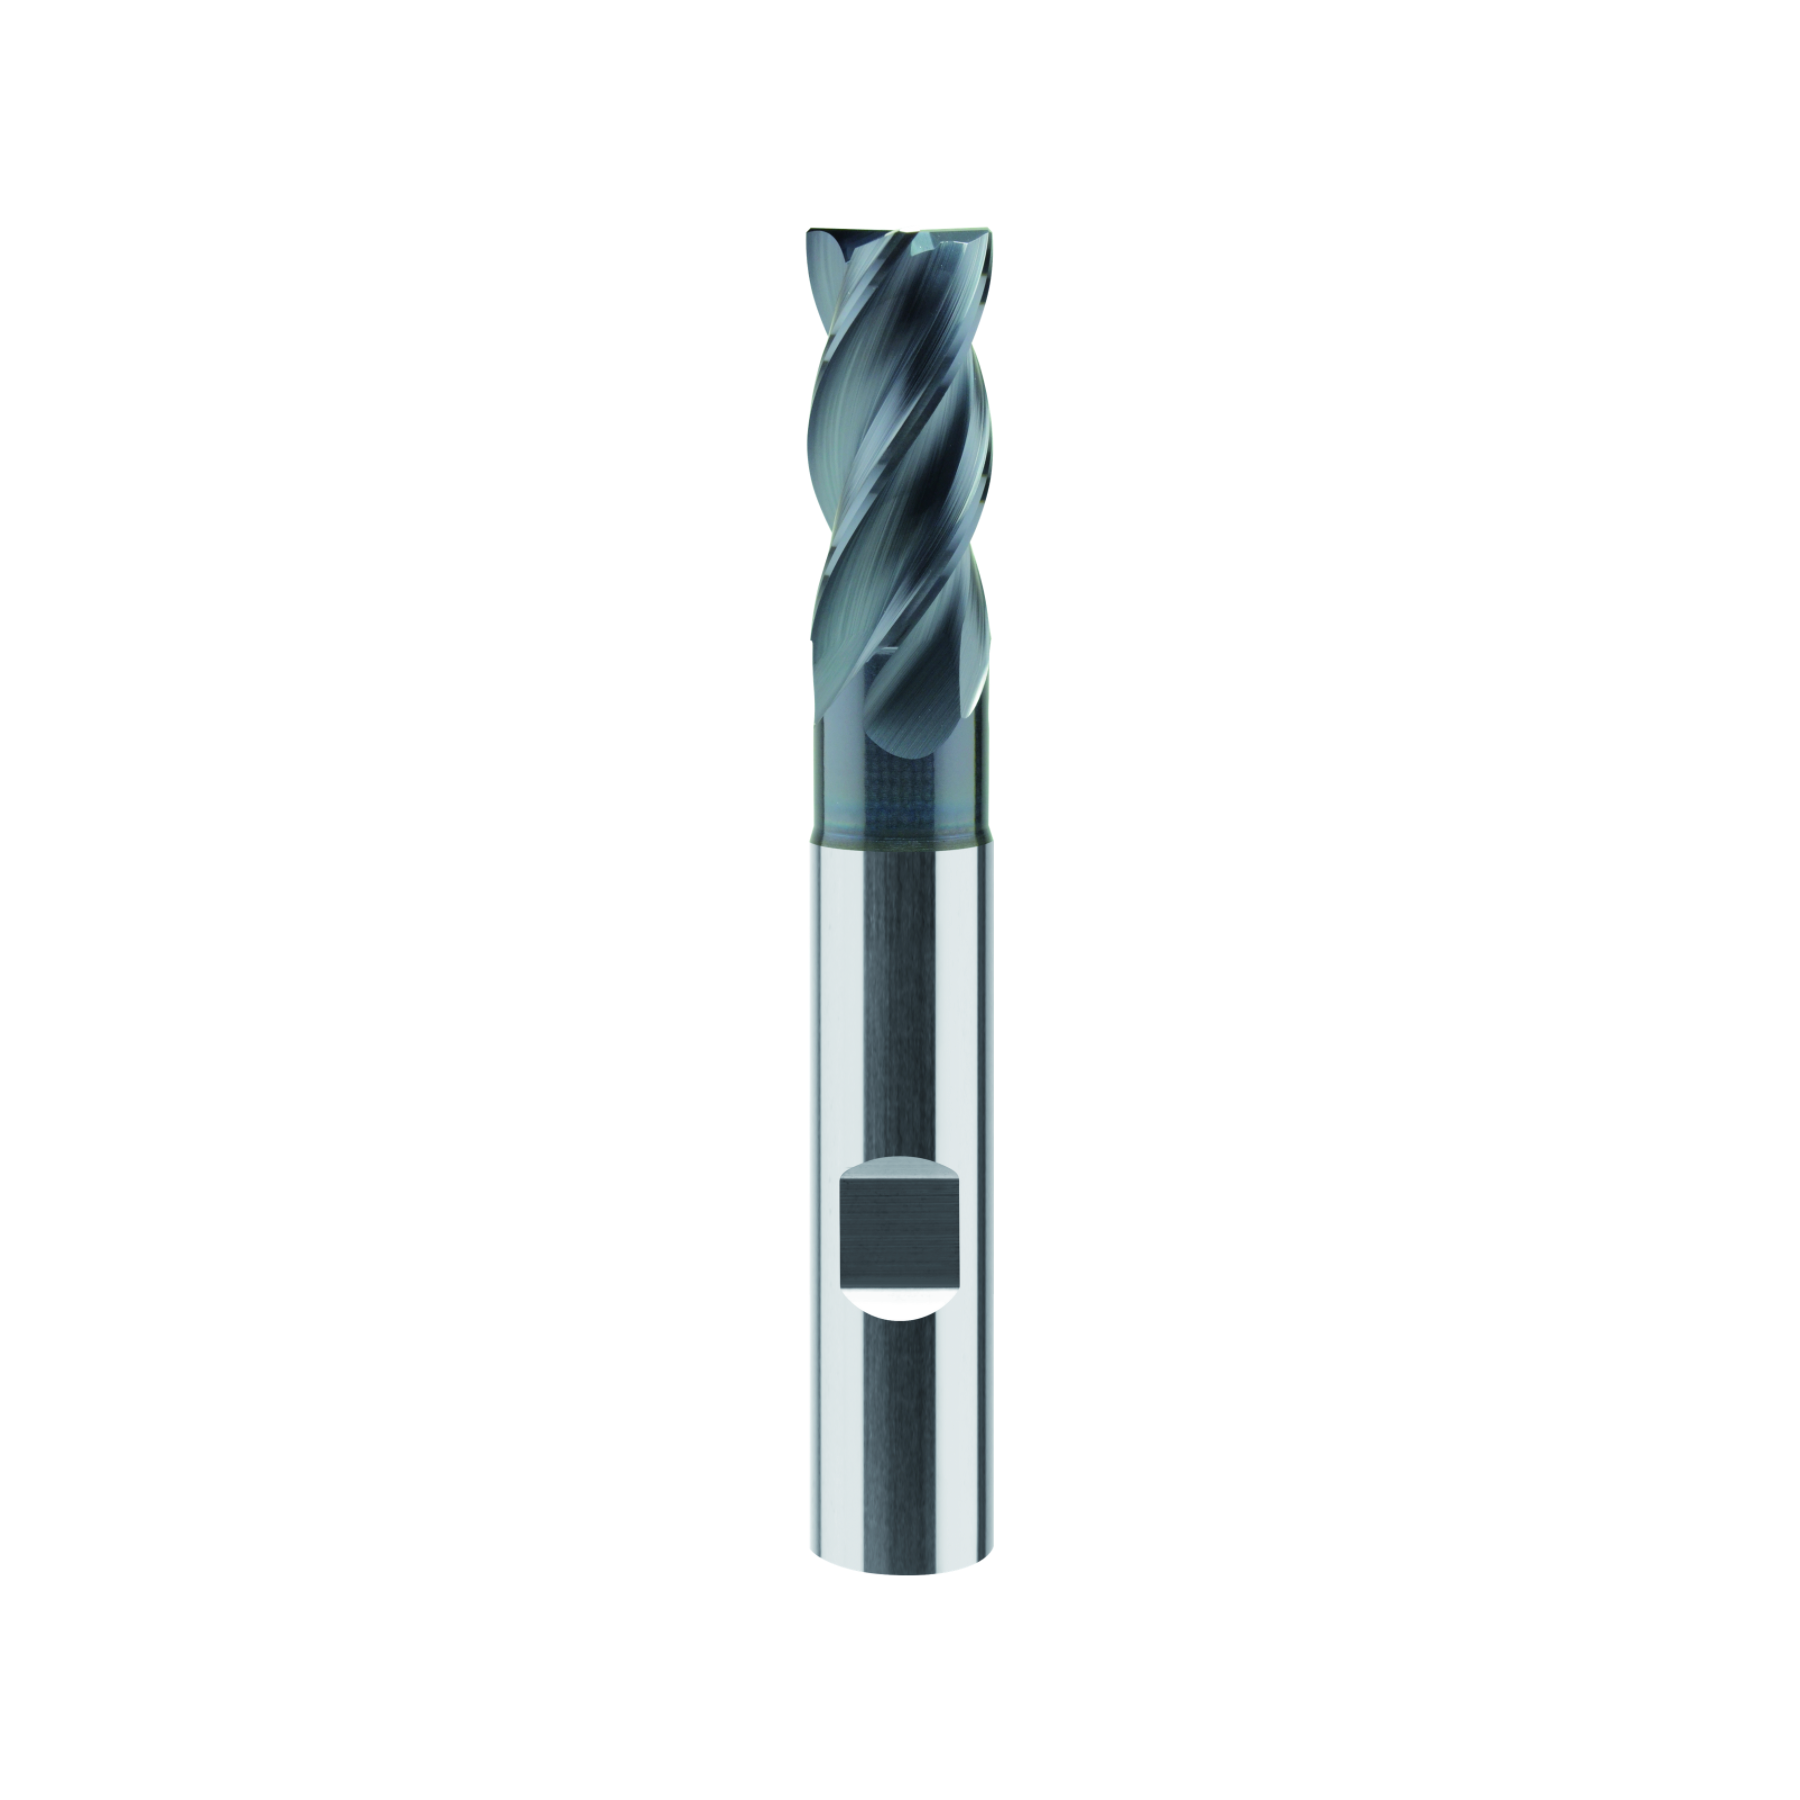 1.390 Solid Carbide End Mill with Variable Pitch | 35°-38° | 4 flutes | AlTiN